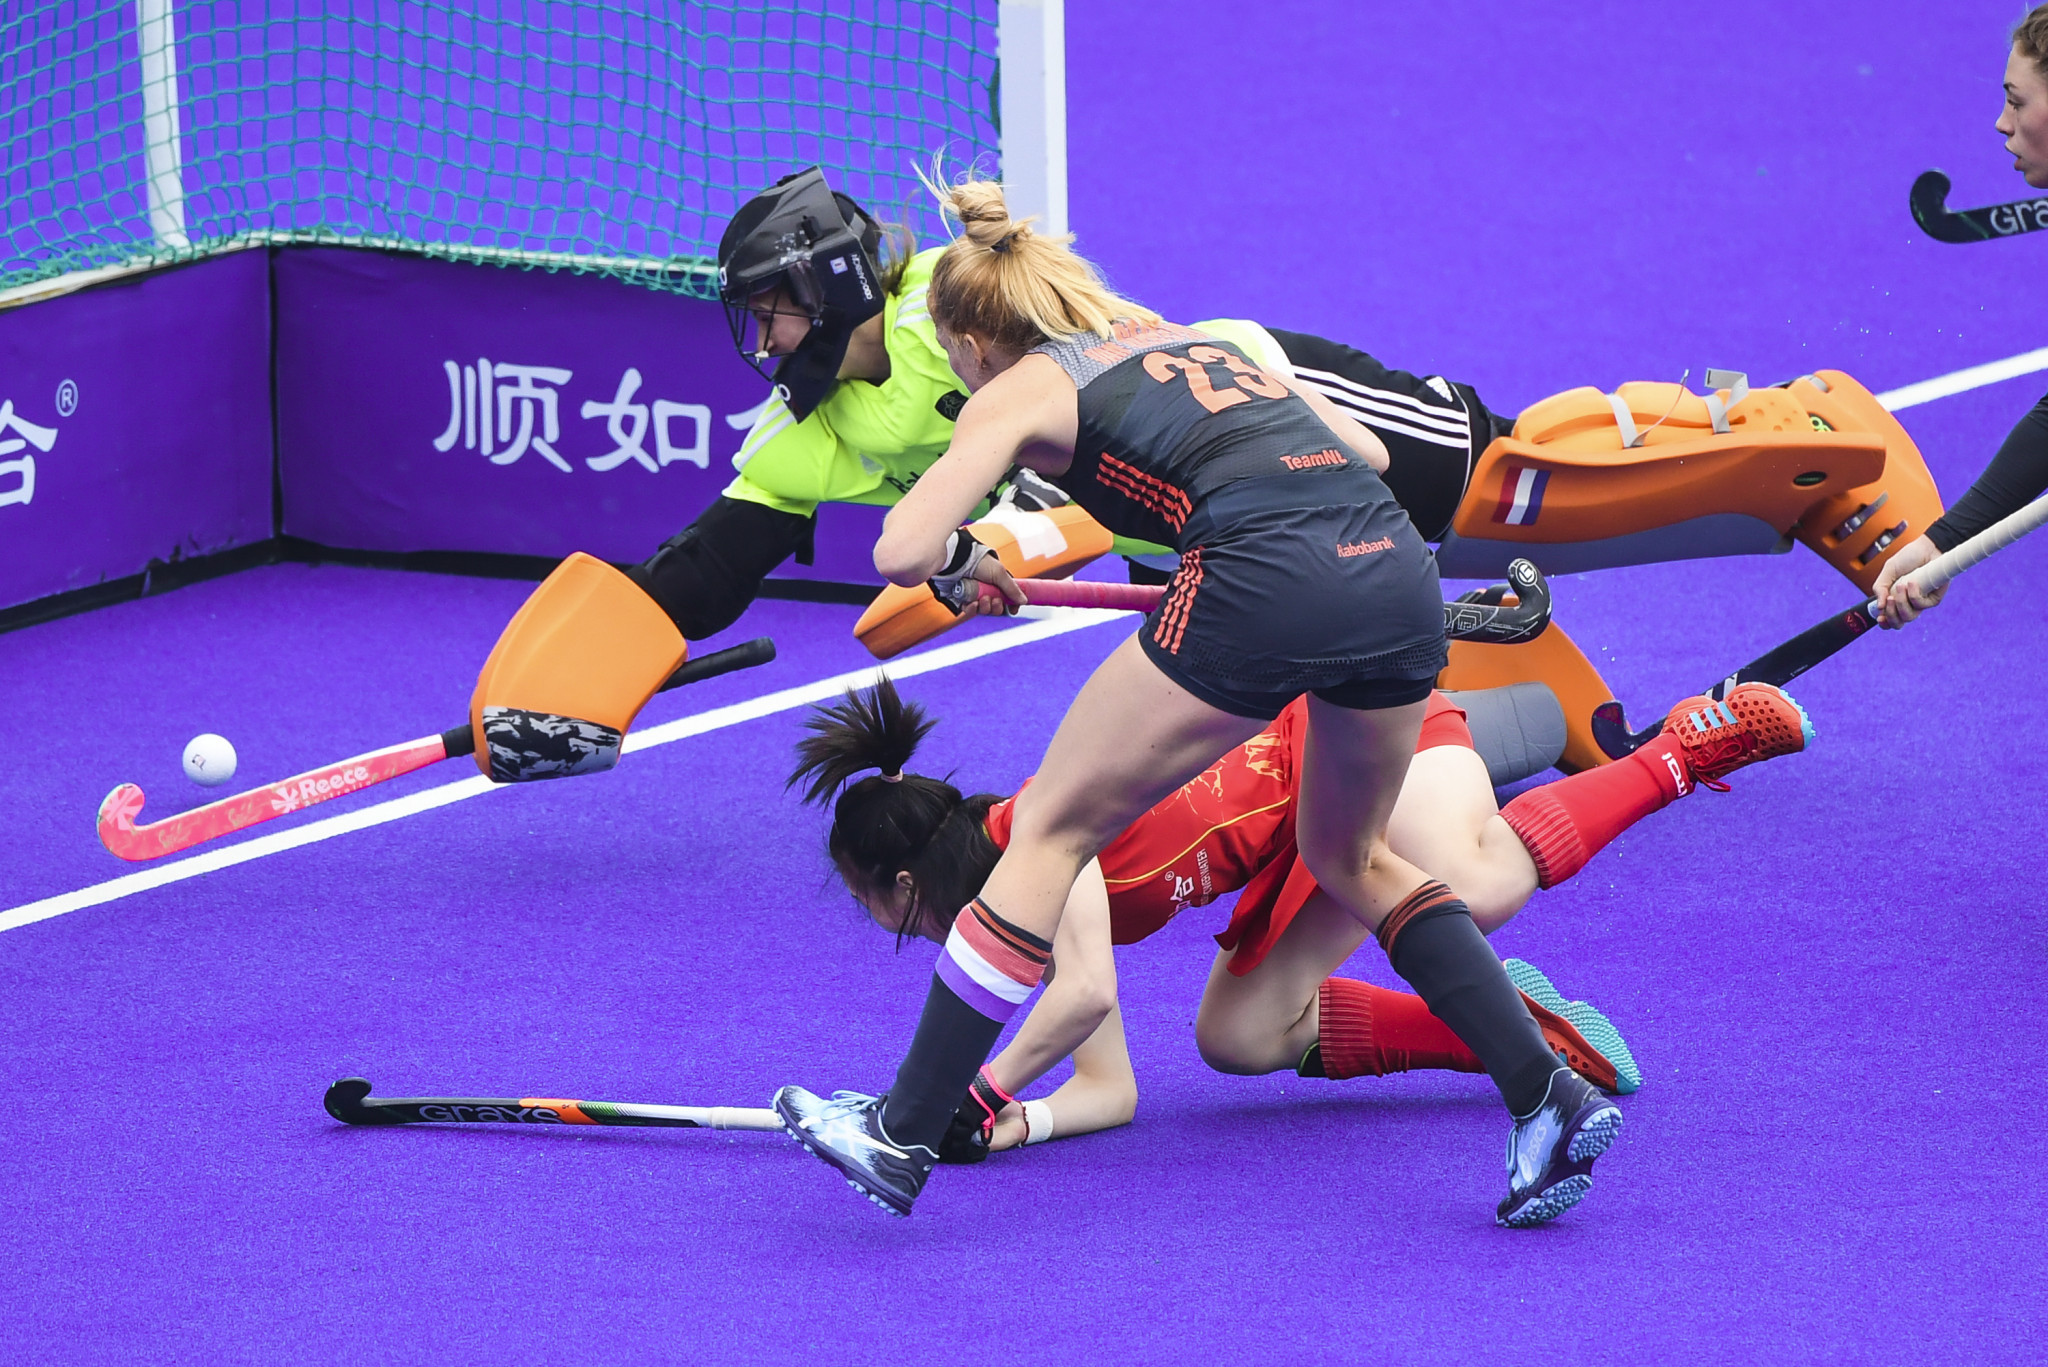 China proved tough opponents for the Dutch team before the visitors eventually claimed a dramatic win ©Getty Images